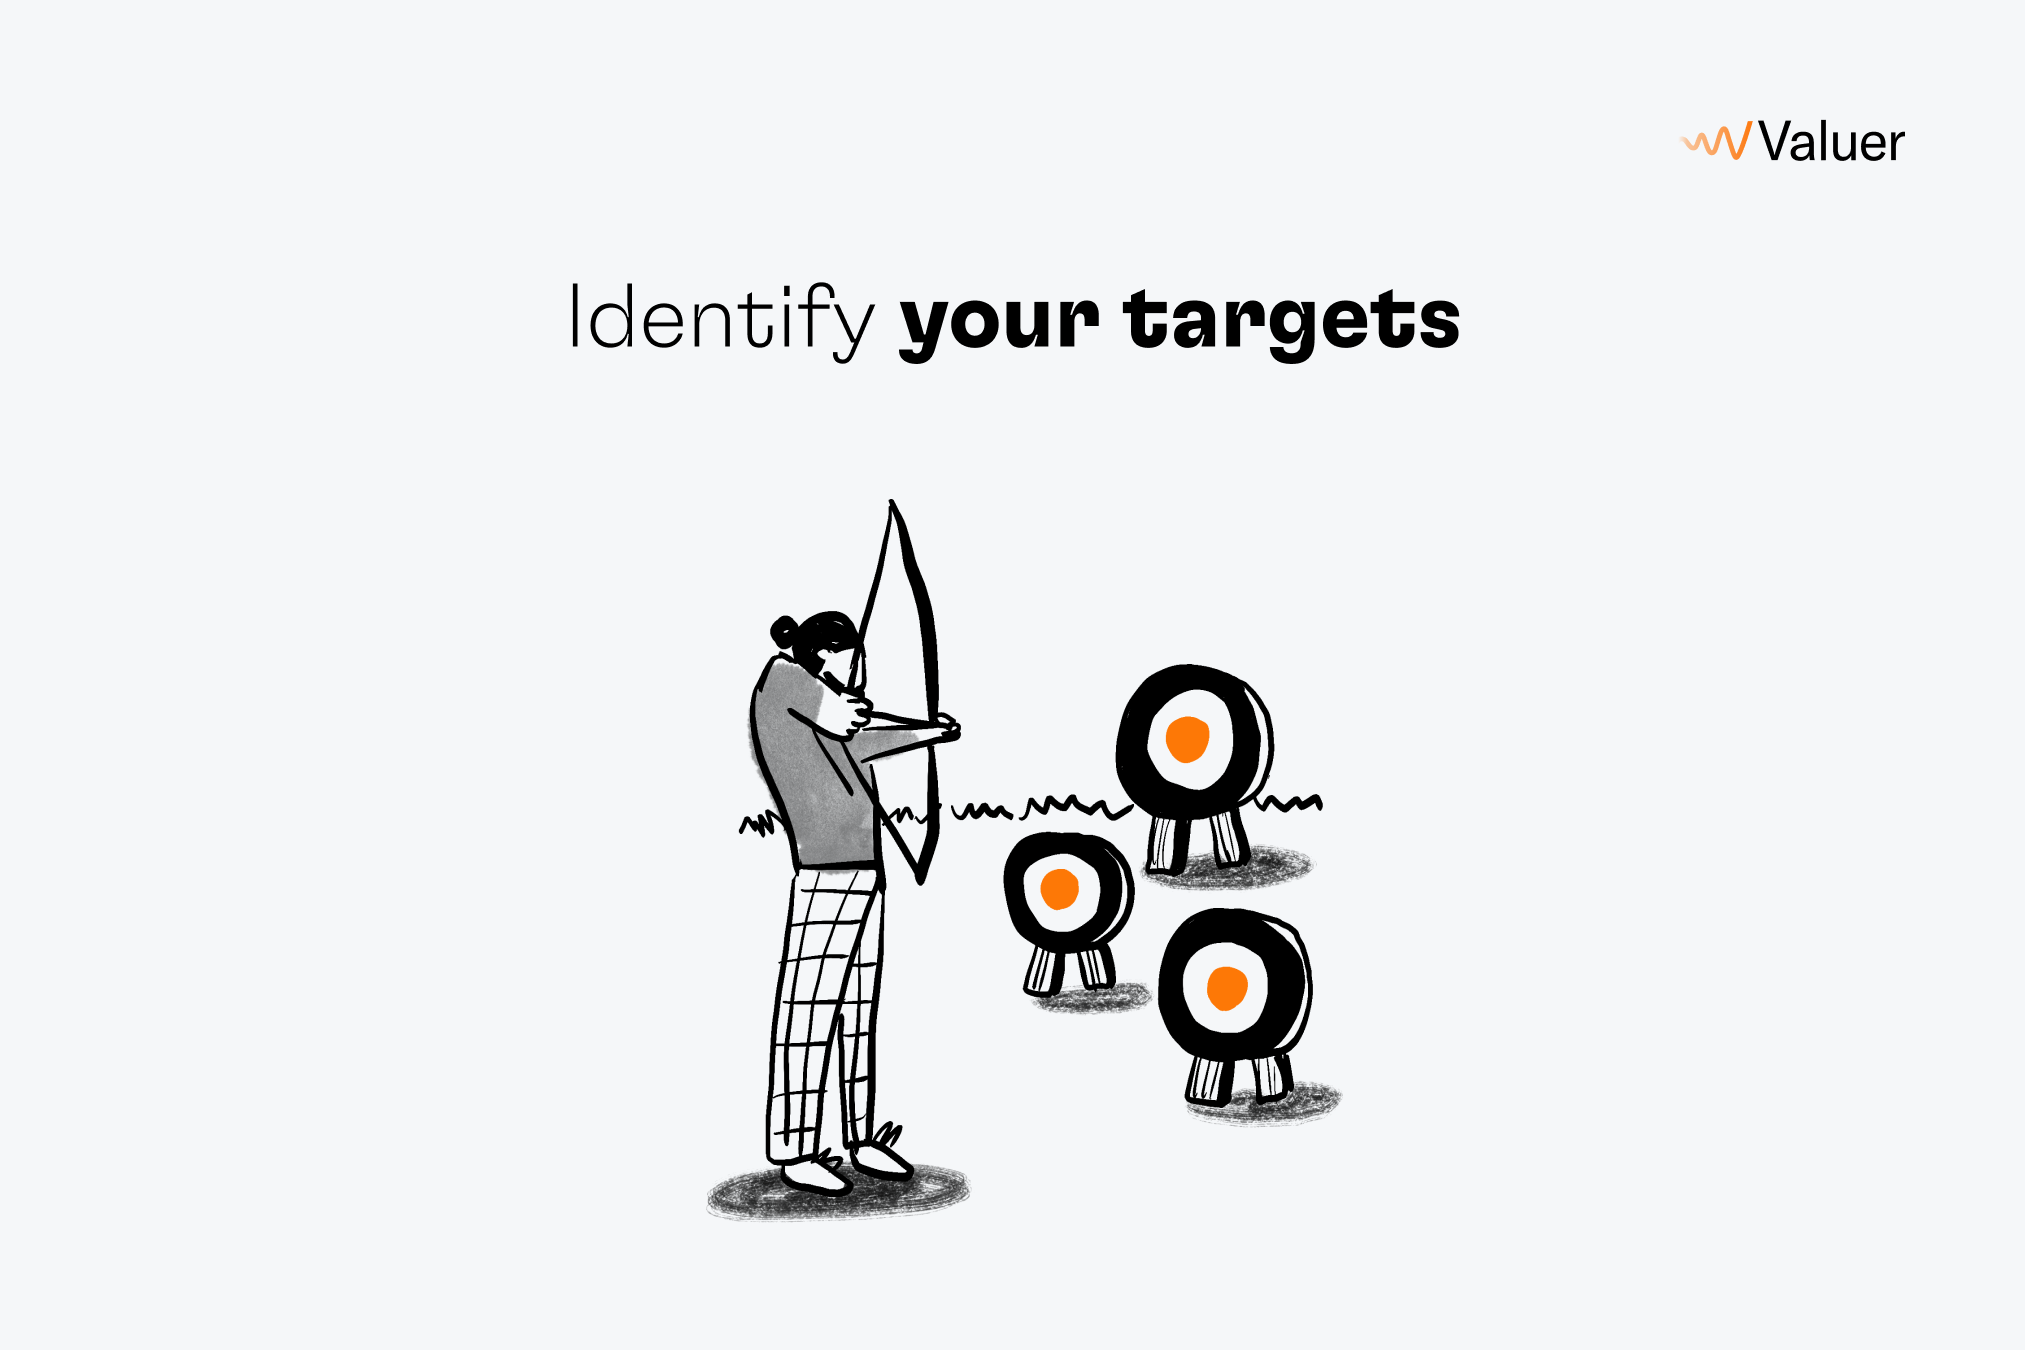 Identify your targets